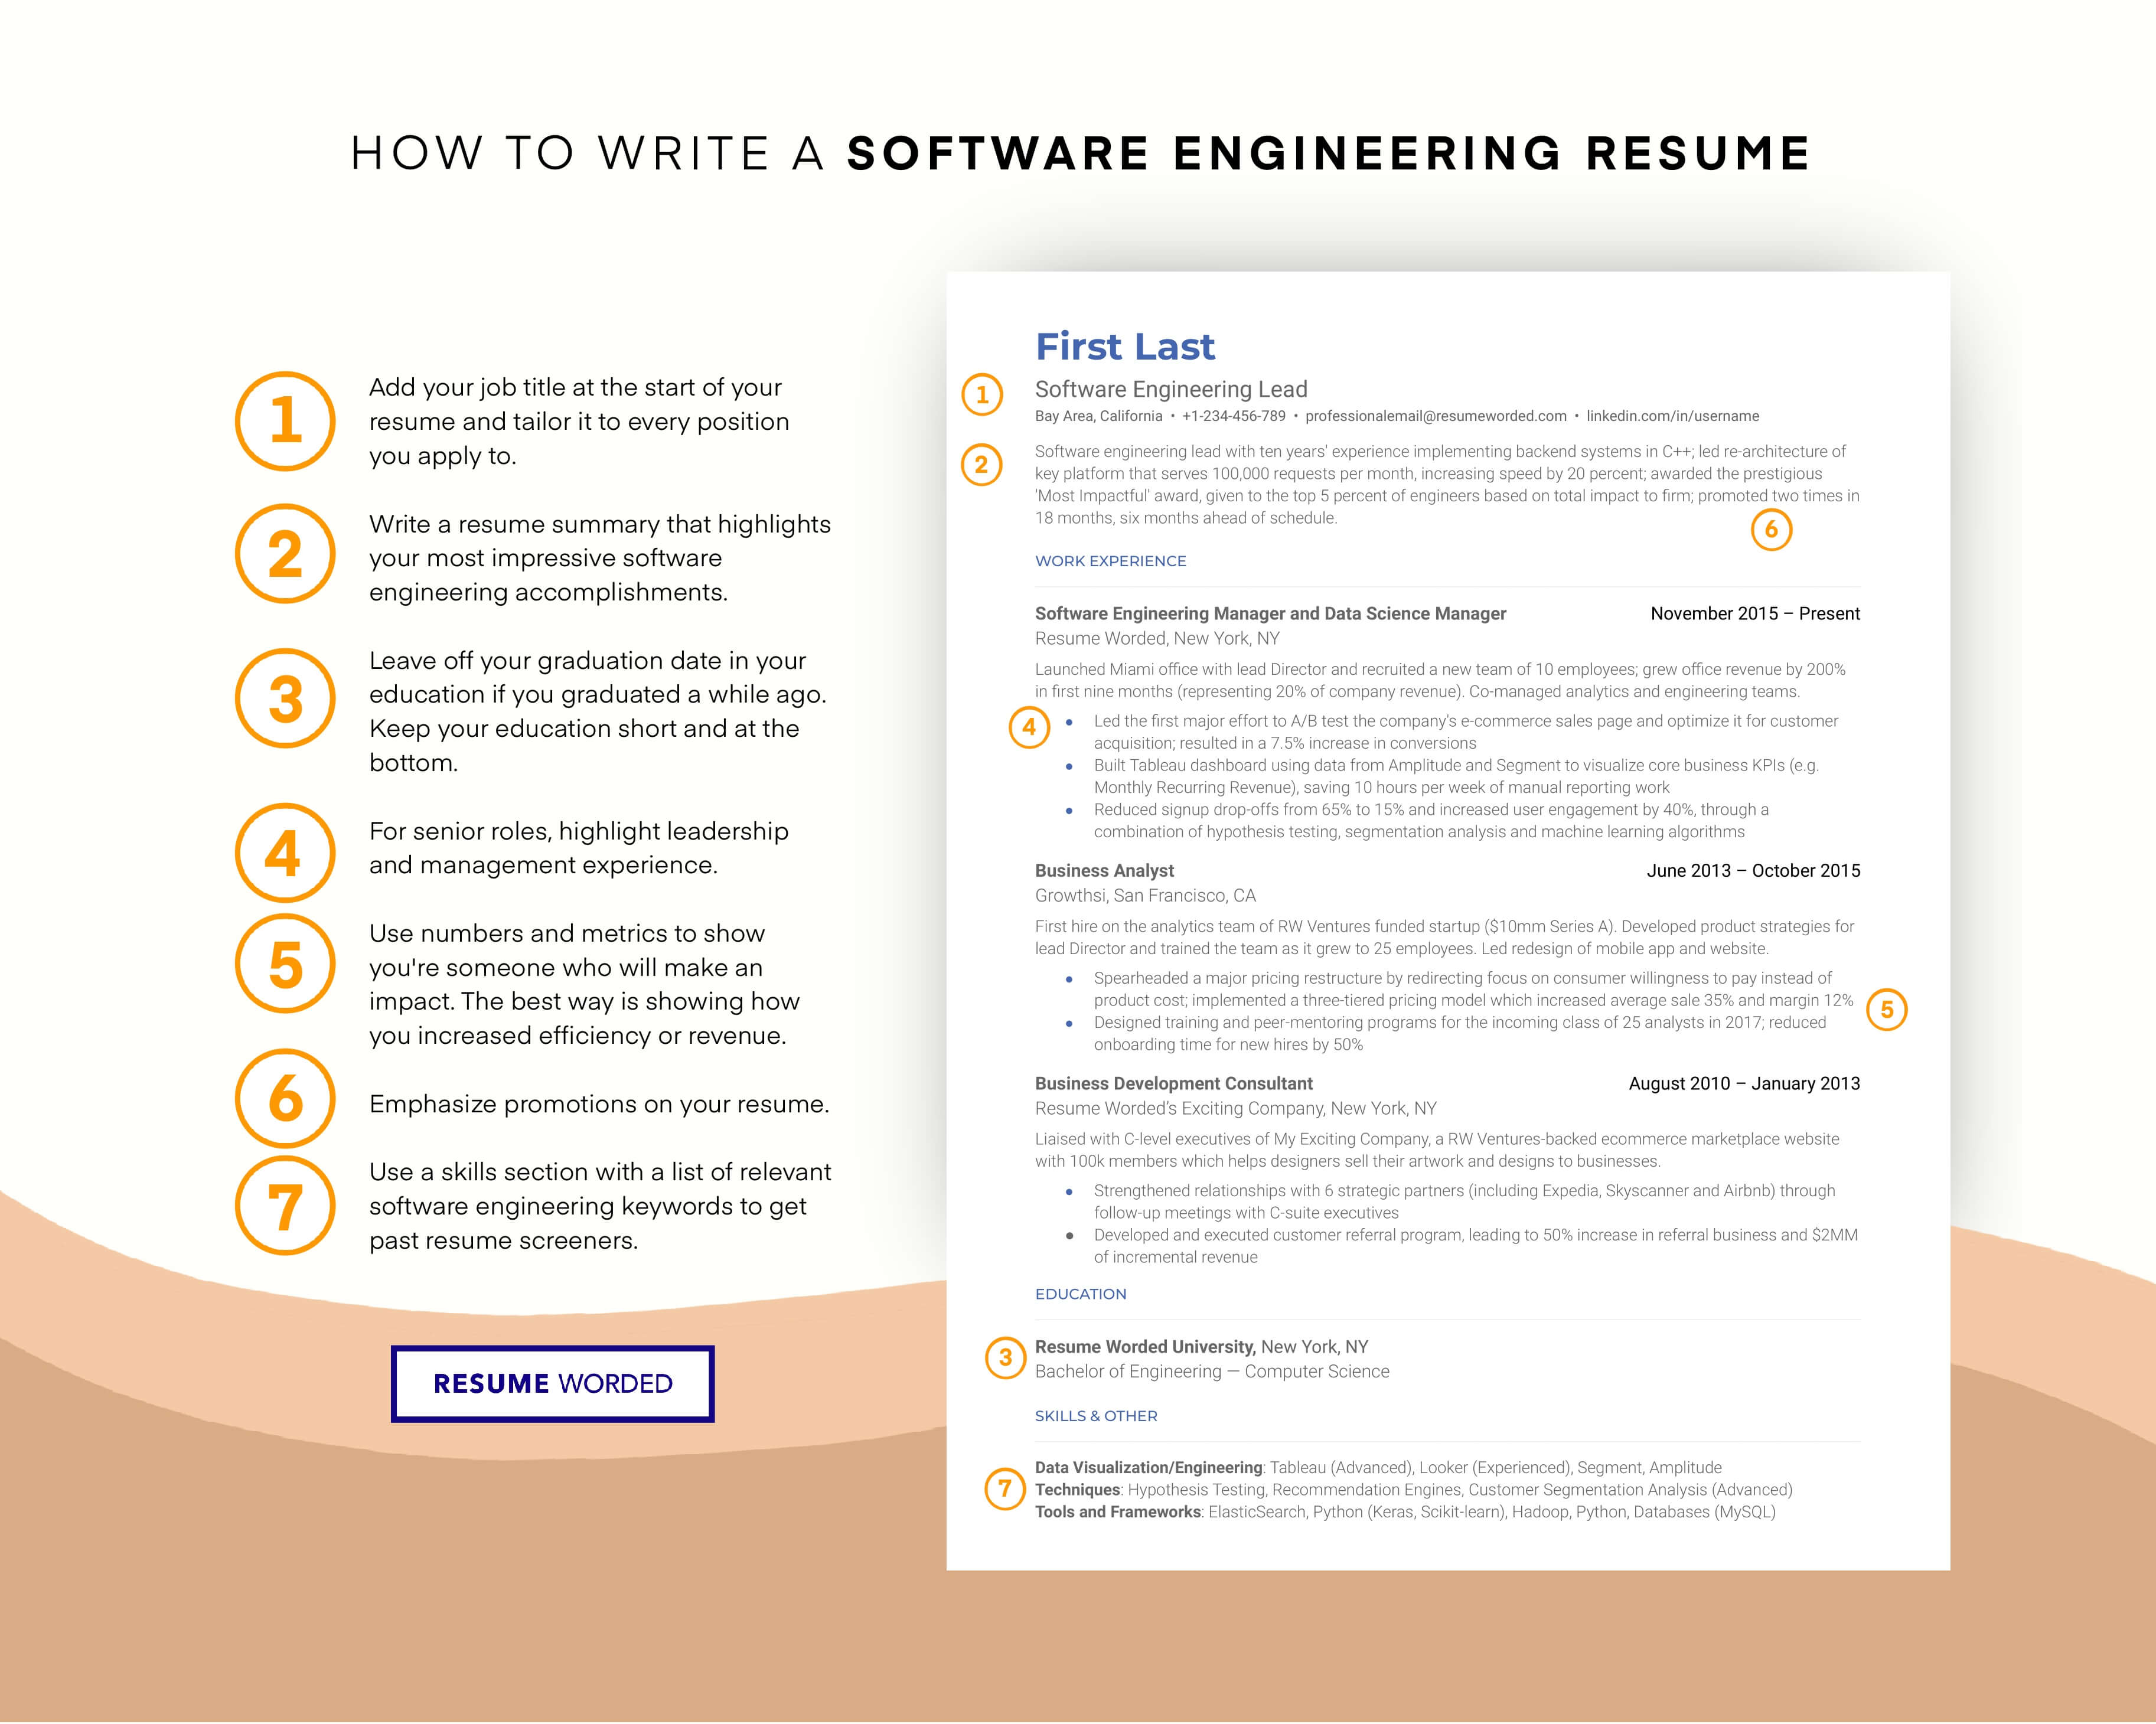 Include the tools and software relevant to your industry - Data Engineering Manager  Resume